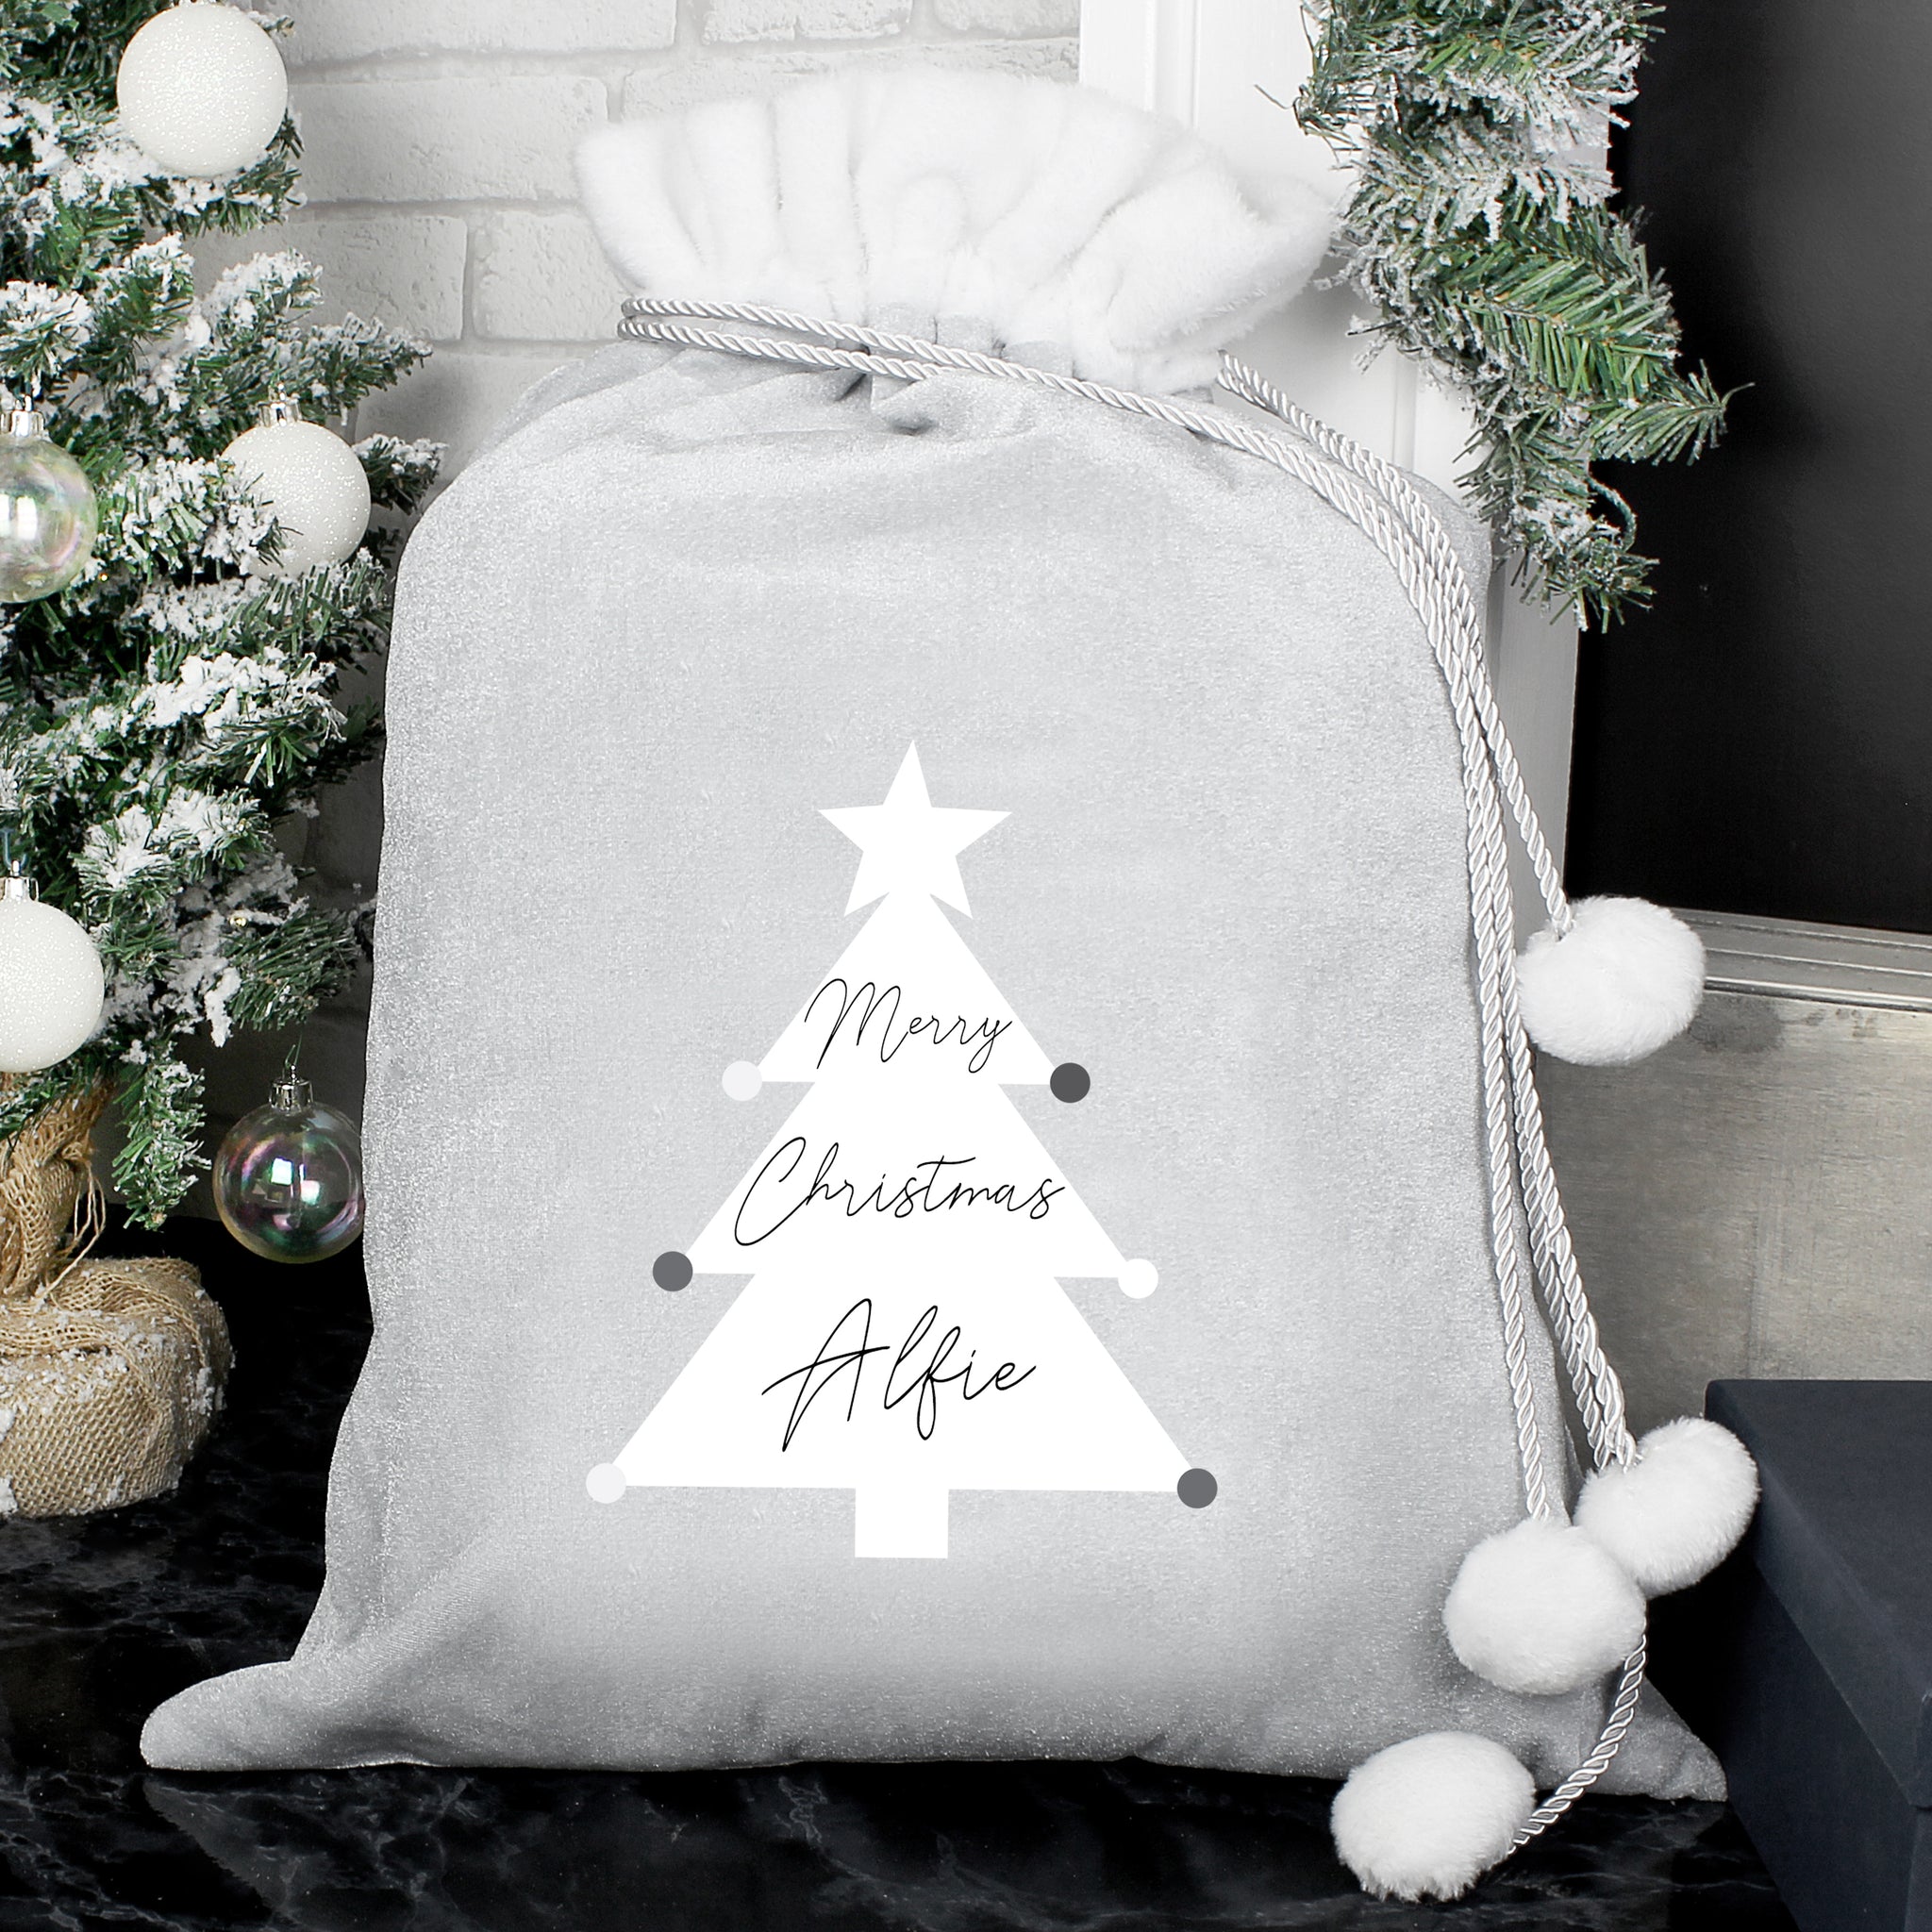 This personalised Christmas sack is the perfect way to present Christmas gifts and looks super luxurious too with beautiful pom pom ties.  It can be stored to use for that little bit of luxury year after year.  This pretty santa sack can be personalised with a name up to 10 characters in length. Please refrain from using fixed upper case as this may make the personalisation hard to read. The words 'Merry Christmas' is fixed text.